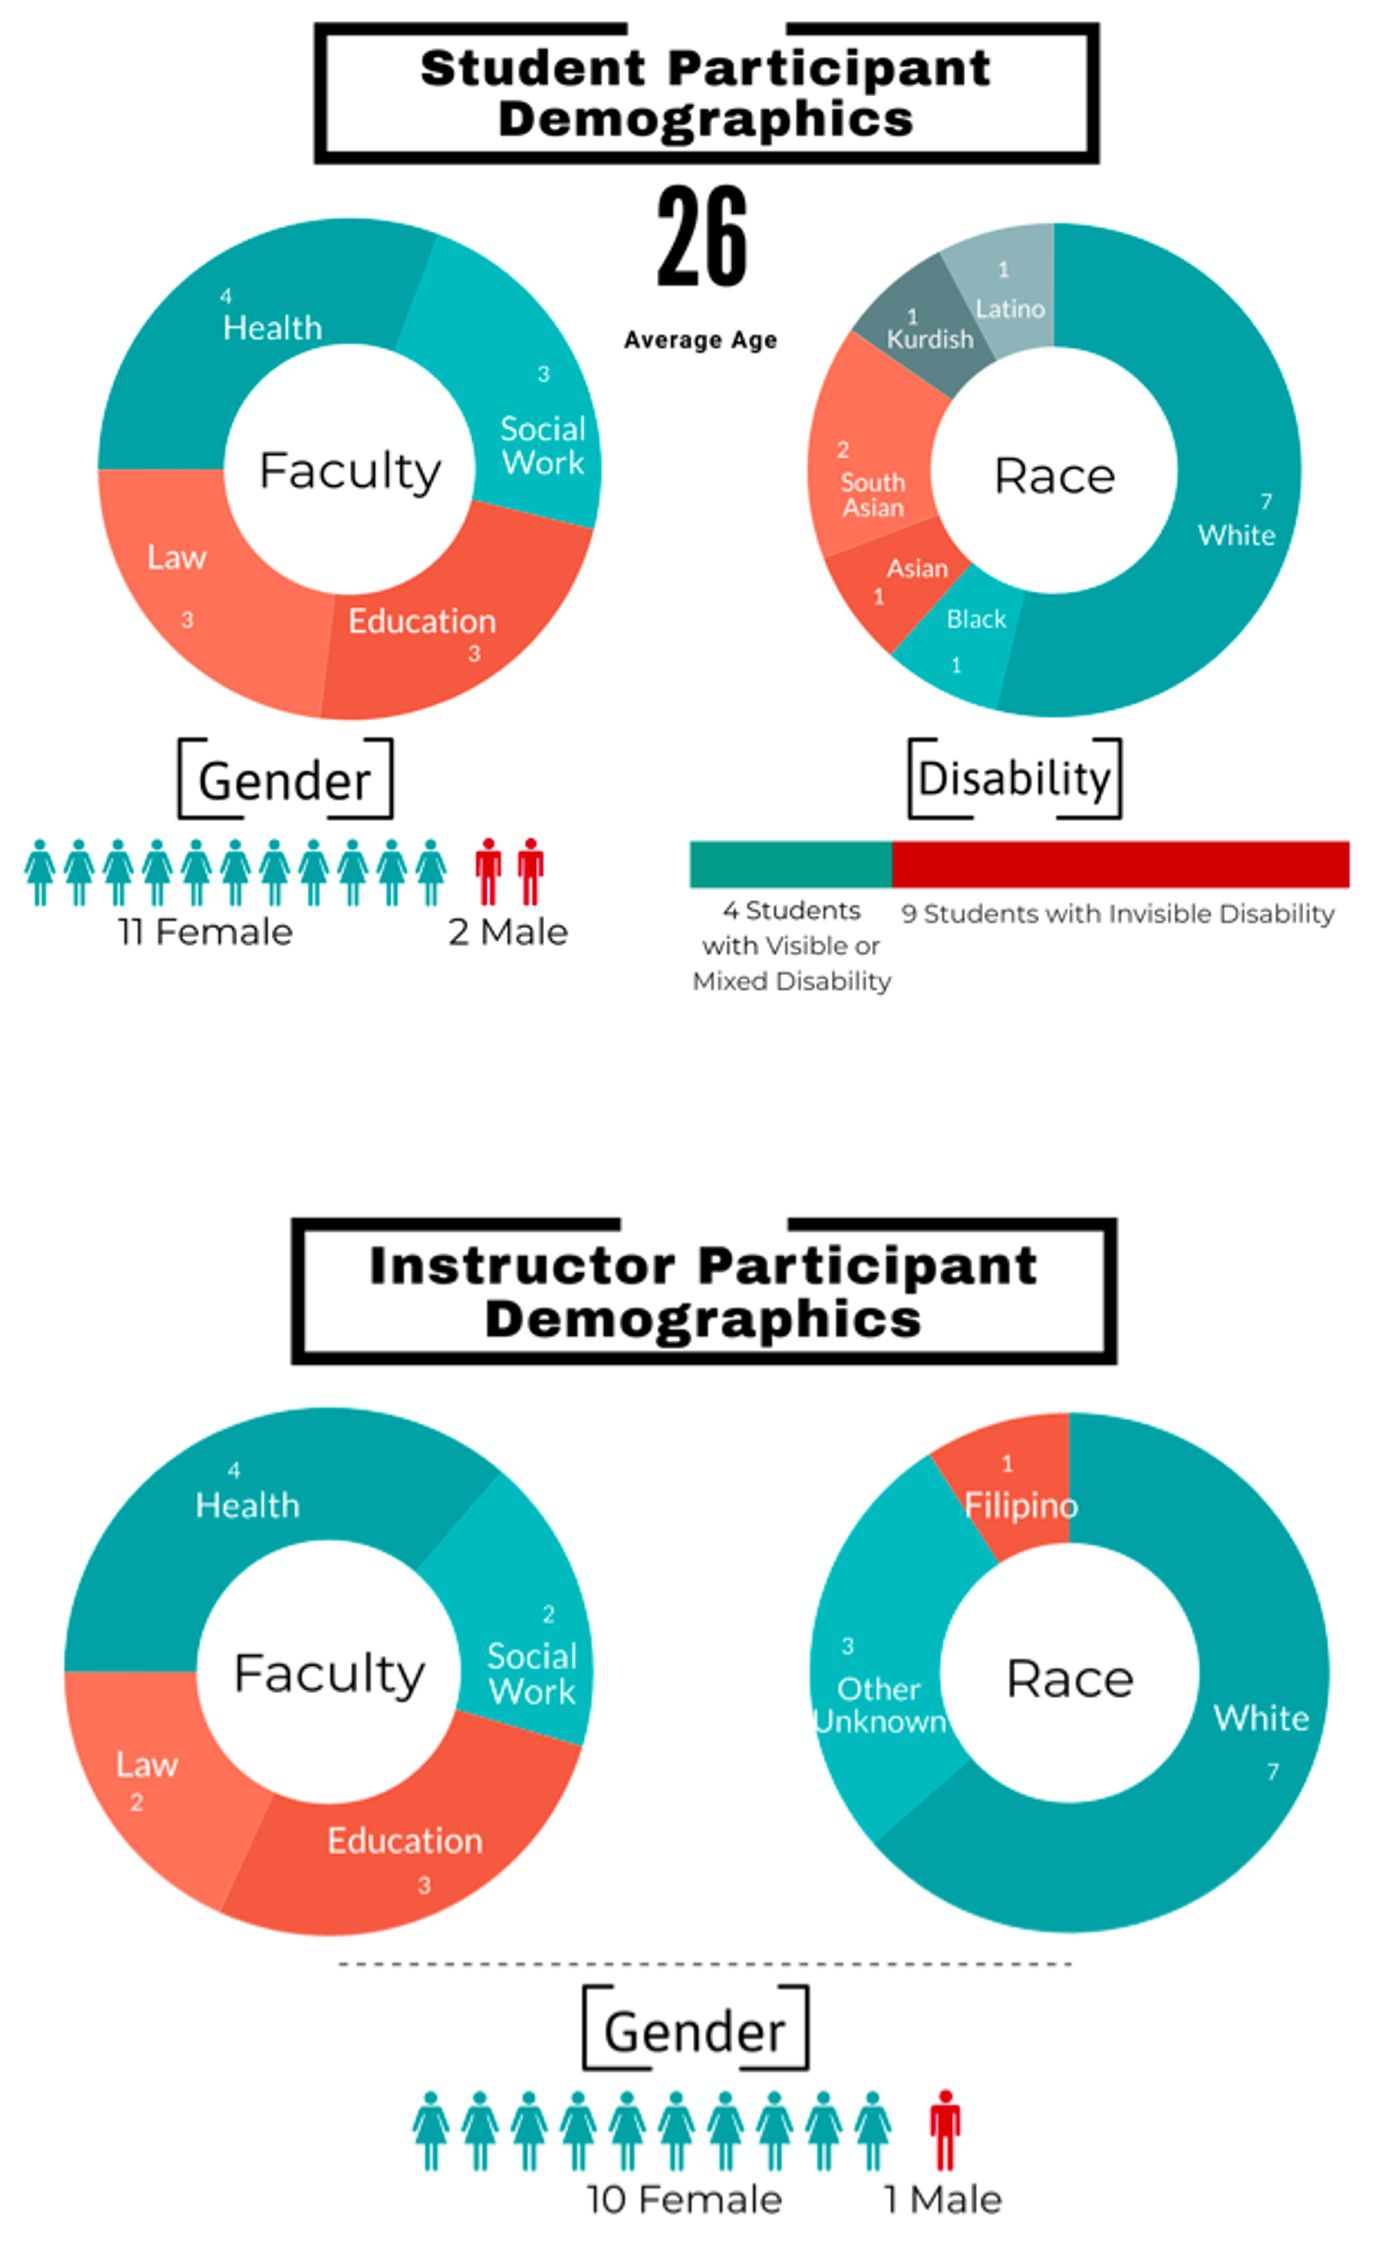 Student Participant Demographics are as follows: The average age of the 13 participants was 26. 11 of the participants were female and two were male. Four participants were from the faculty of Health, 3 from law, 3 from education, and 3 from social work. Of these participants, 9 students had an invisible disability and 4 students had a visible or mixed disability. In terms of race, 7 were White, 1 Latino, 1 Kurdish, 2 South Asian, 1 Asian, and 1 Black. Of the 11 instructor participants, 10 identified as female and one individual as male. 4 were from the Faculty of Health, 2 from Law, 3 from Education, and 2 from Social Work. In terms of race, 7 identified as White, 1 as Filipino, and 3 as other/unknown.